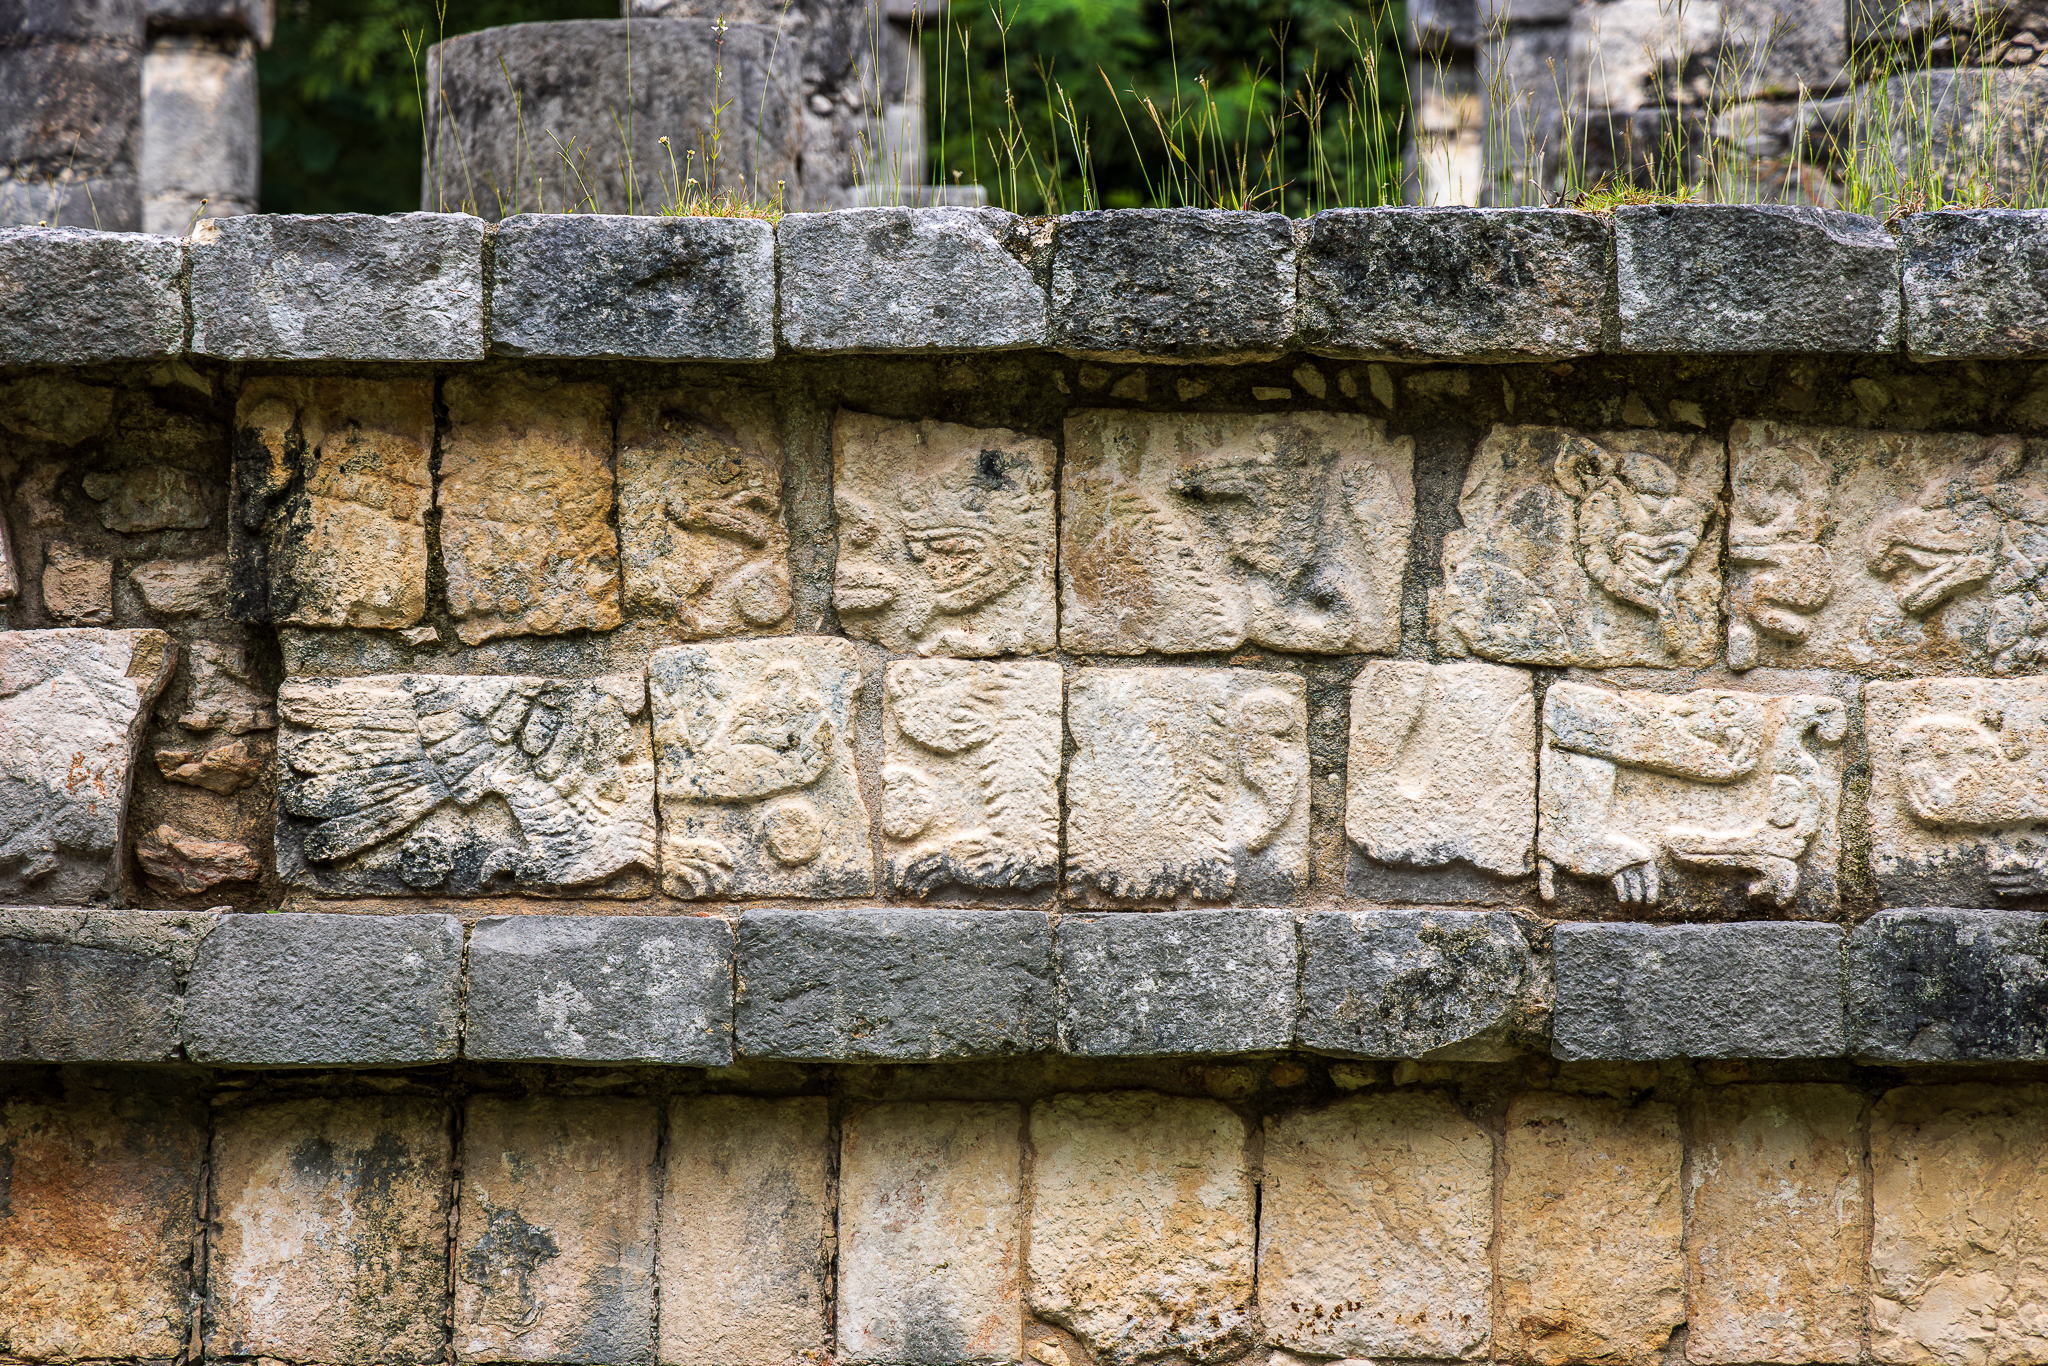 A detailed view of a frieze depicting Mayan scenes in bas-relief, carved into a stone wall at Chichen Itza. Each figure is etched with distinct outlines and worn by time, with grass growing over the top edge of the wall.